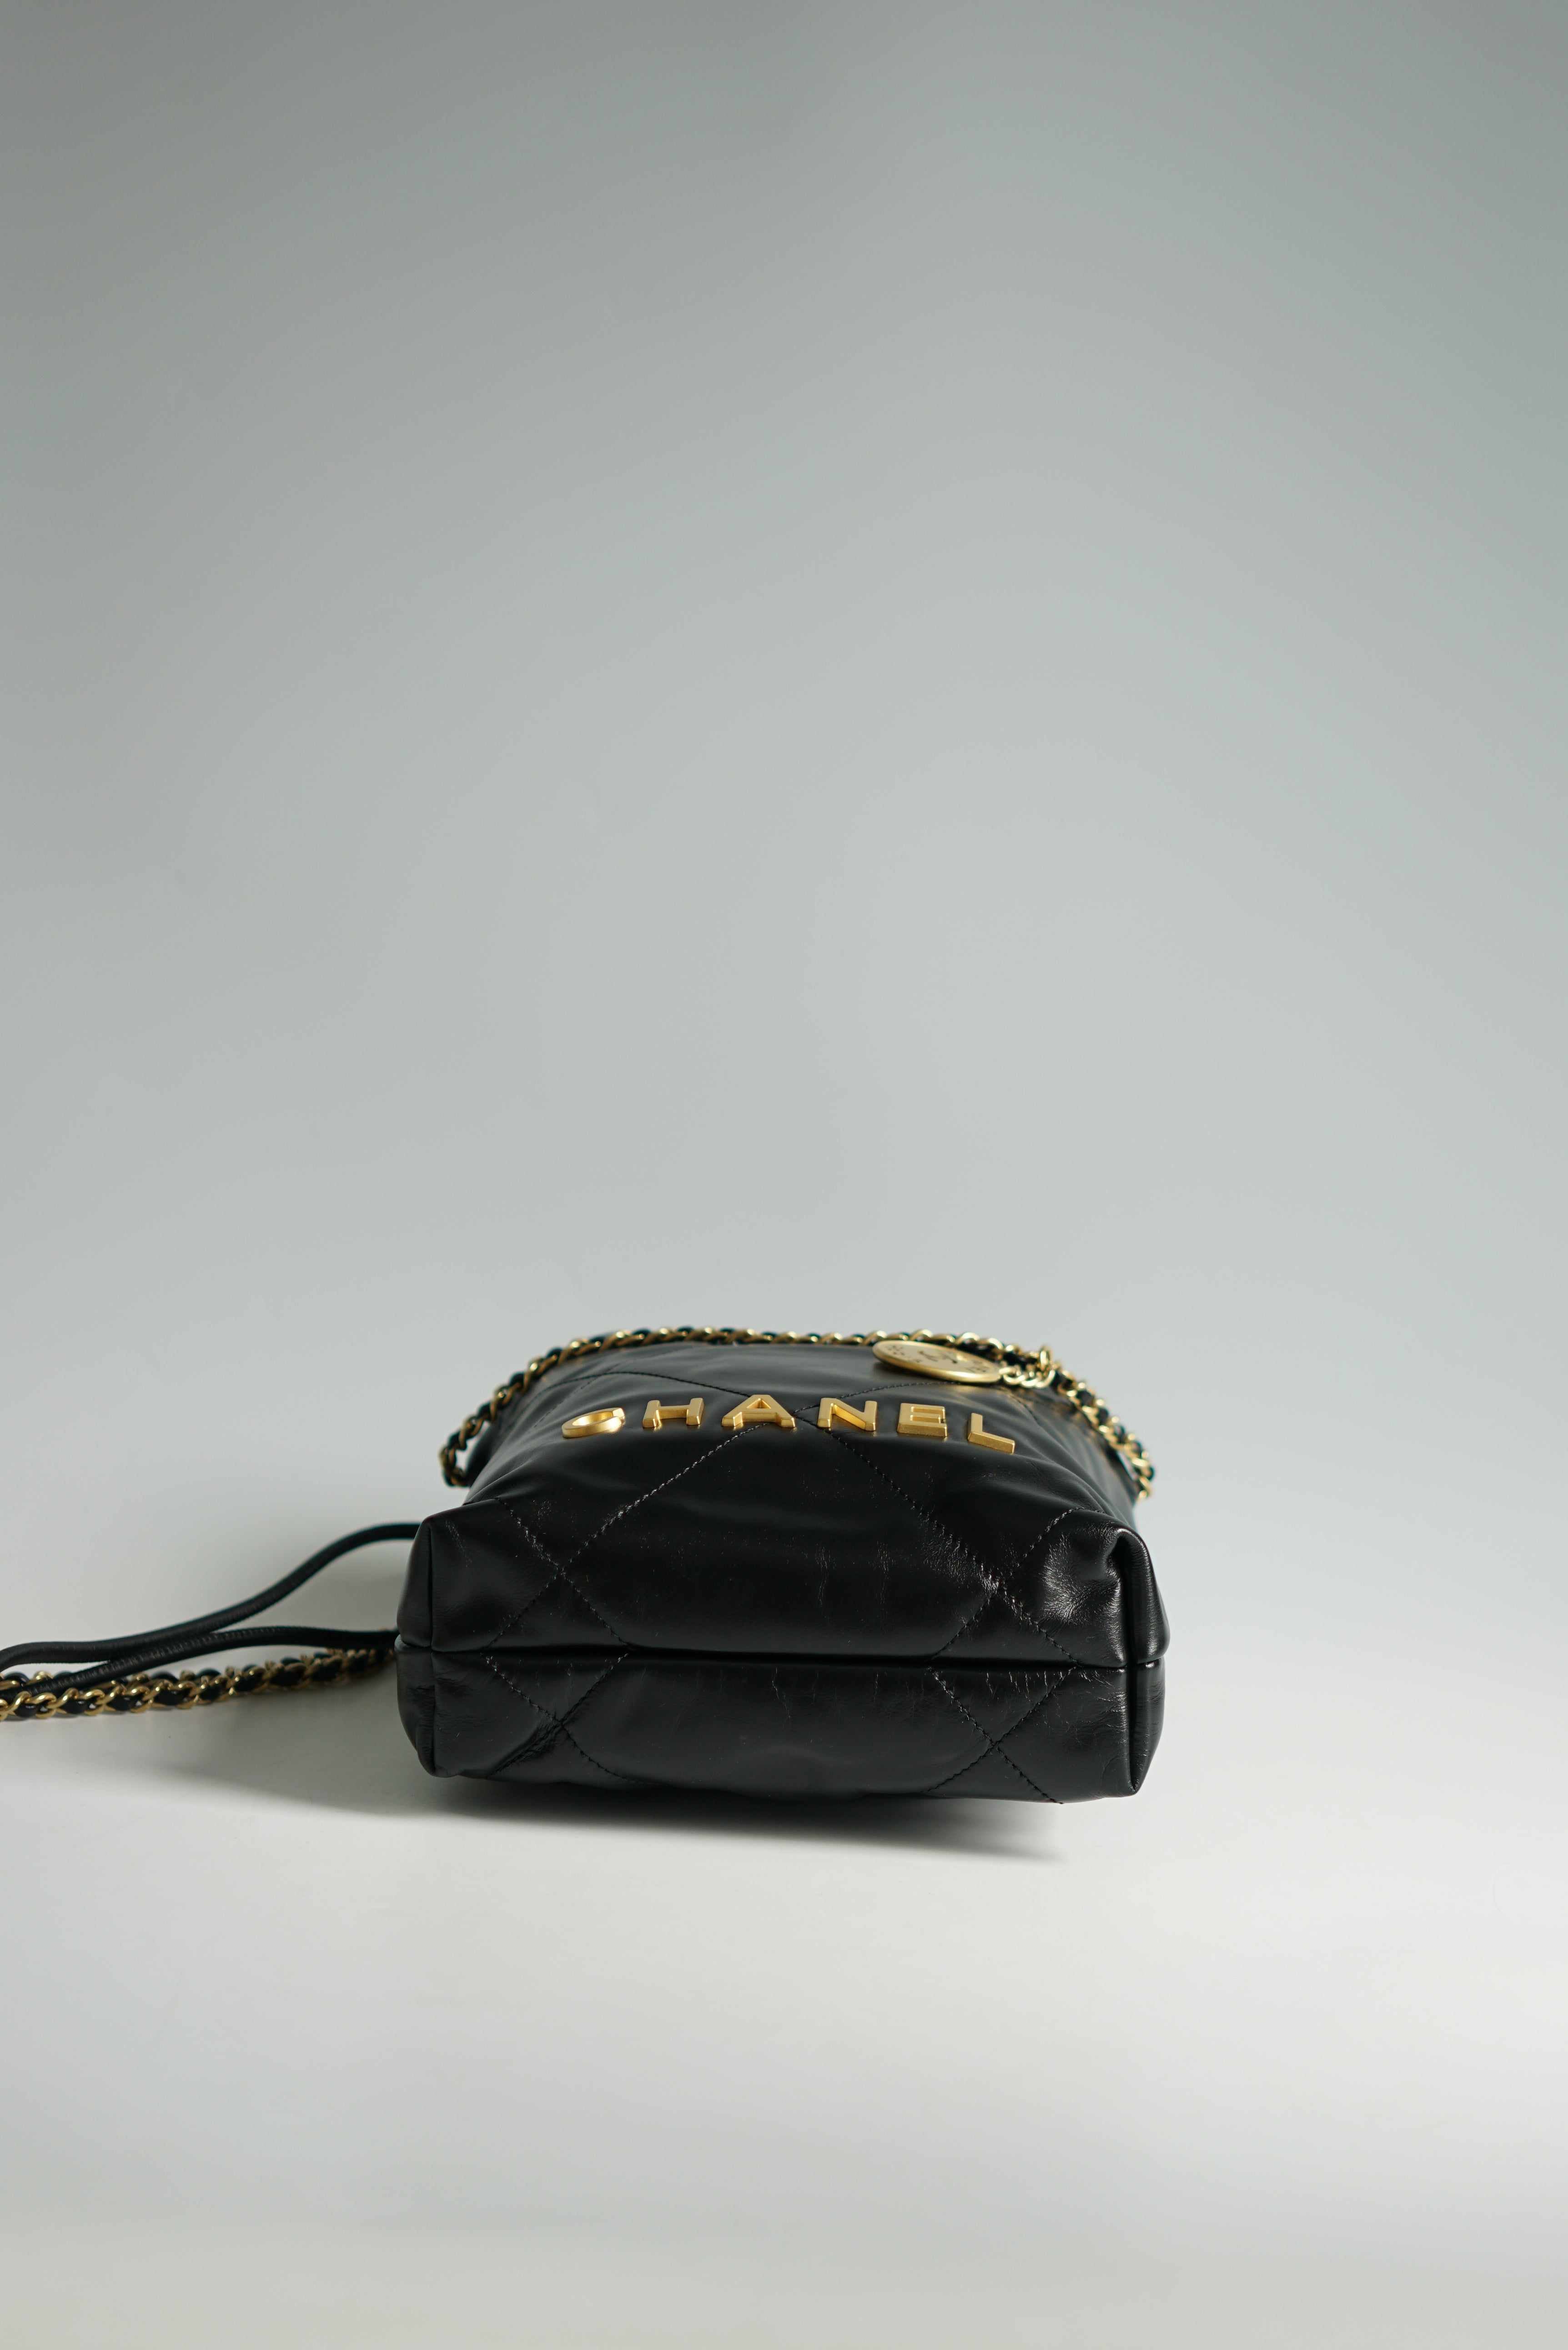 Chanel Mini 22 Black Calfskin Leather and Gold Hardware (Microchip)